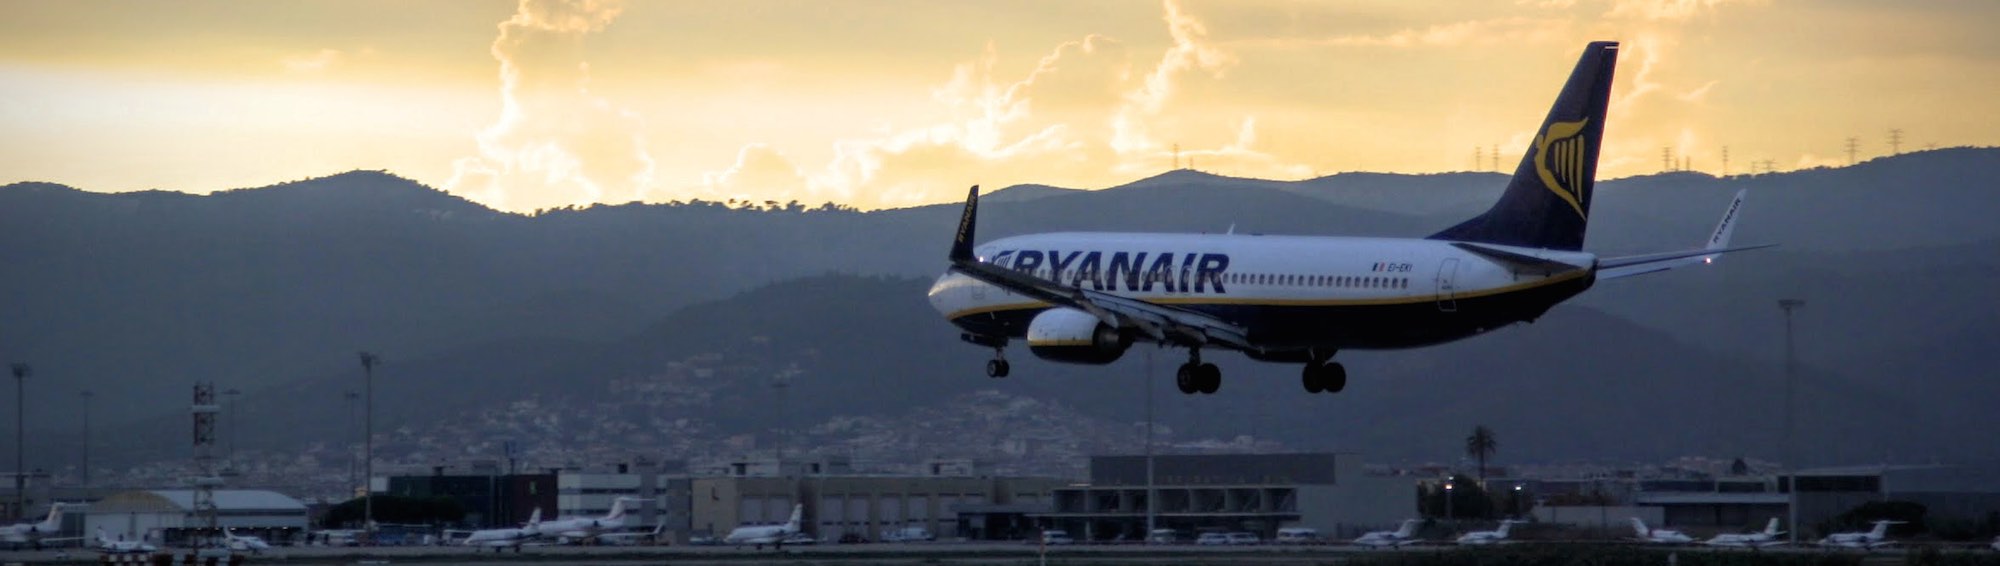 Best time to book flights for Malaga (AGP) to Bari (BRI) flights with Ryanair at AirHint